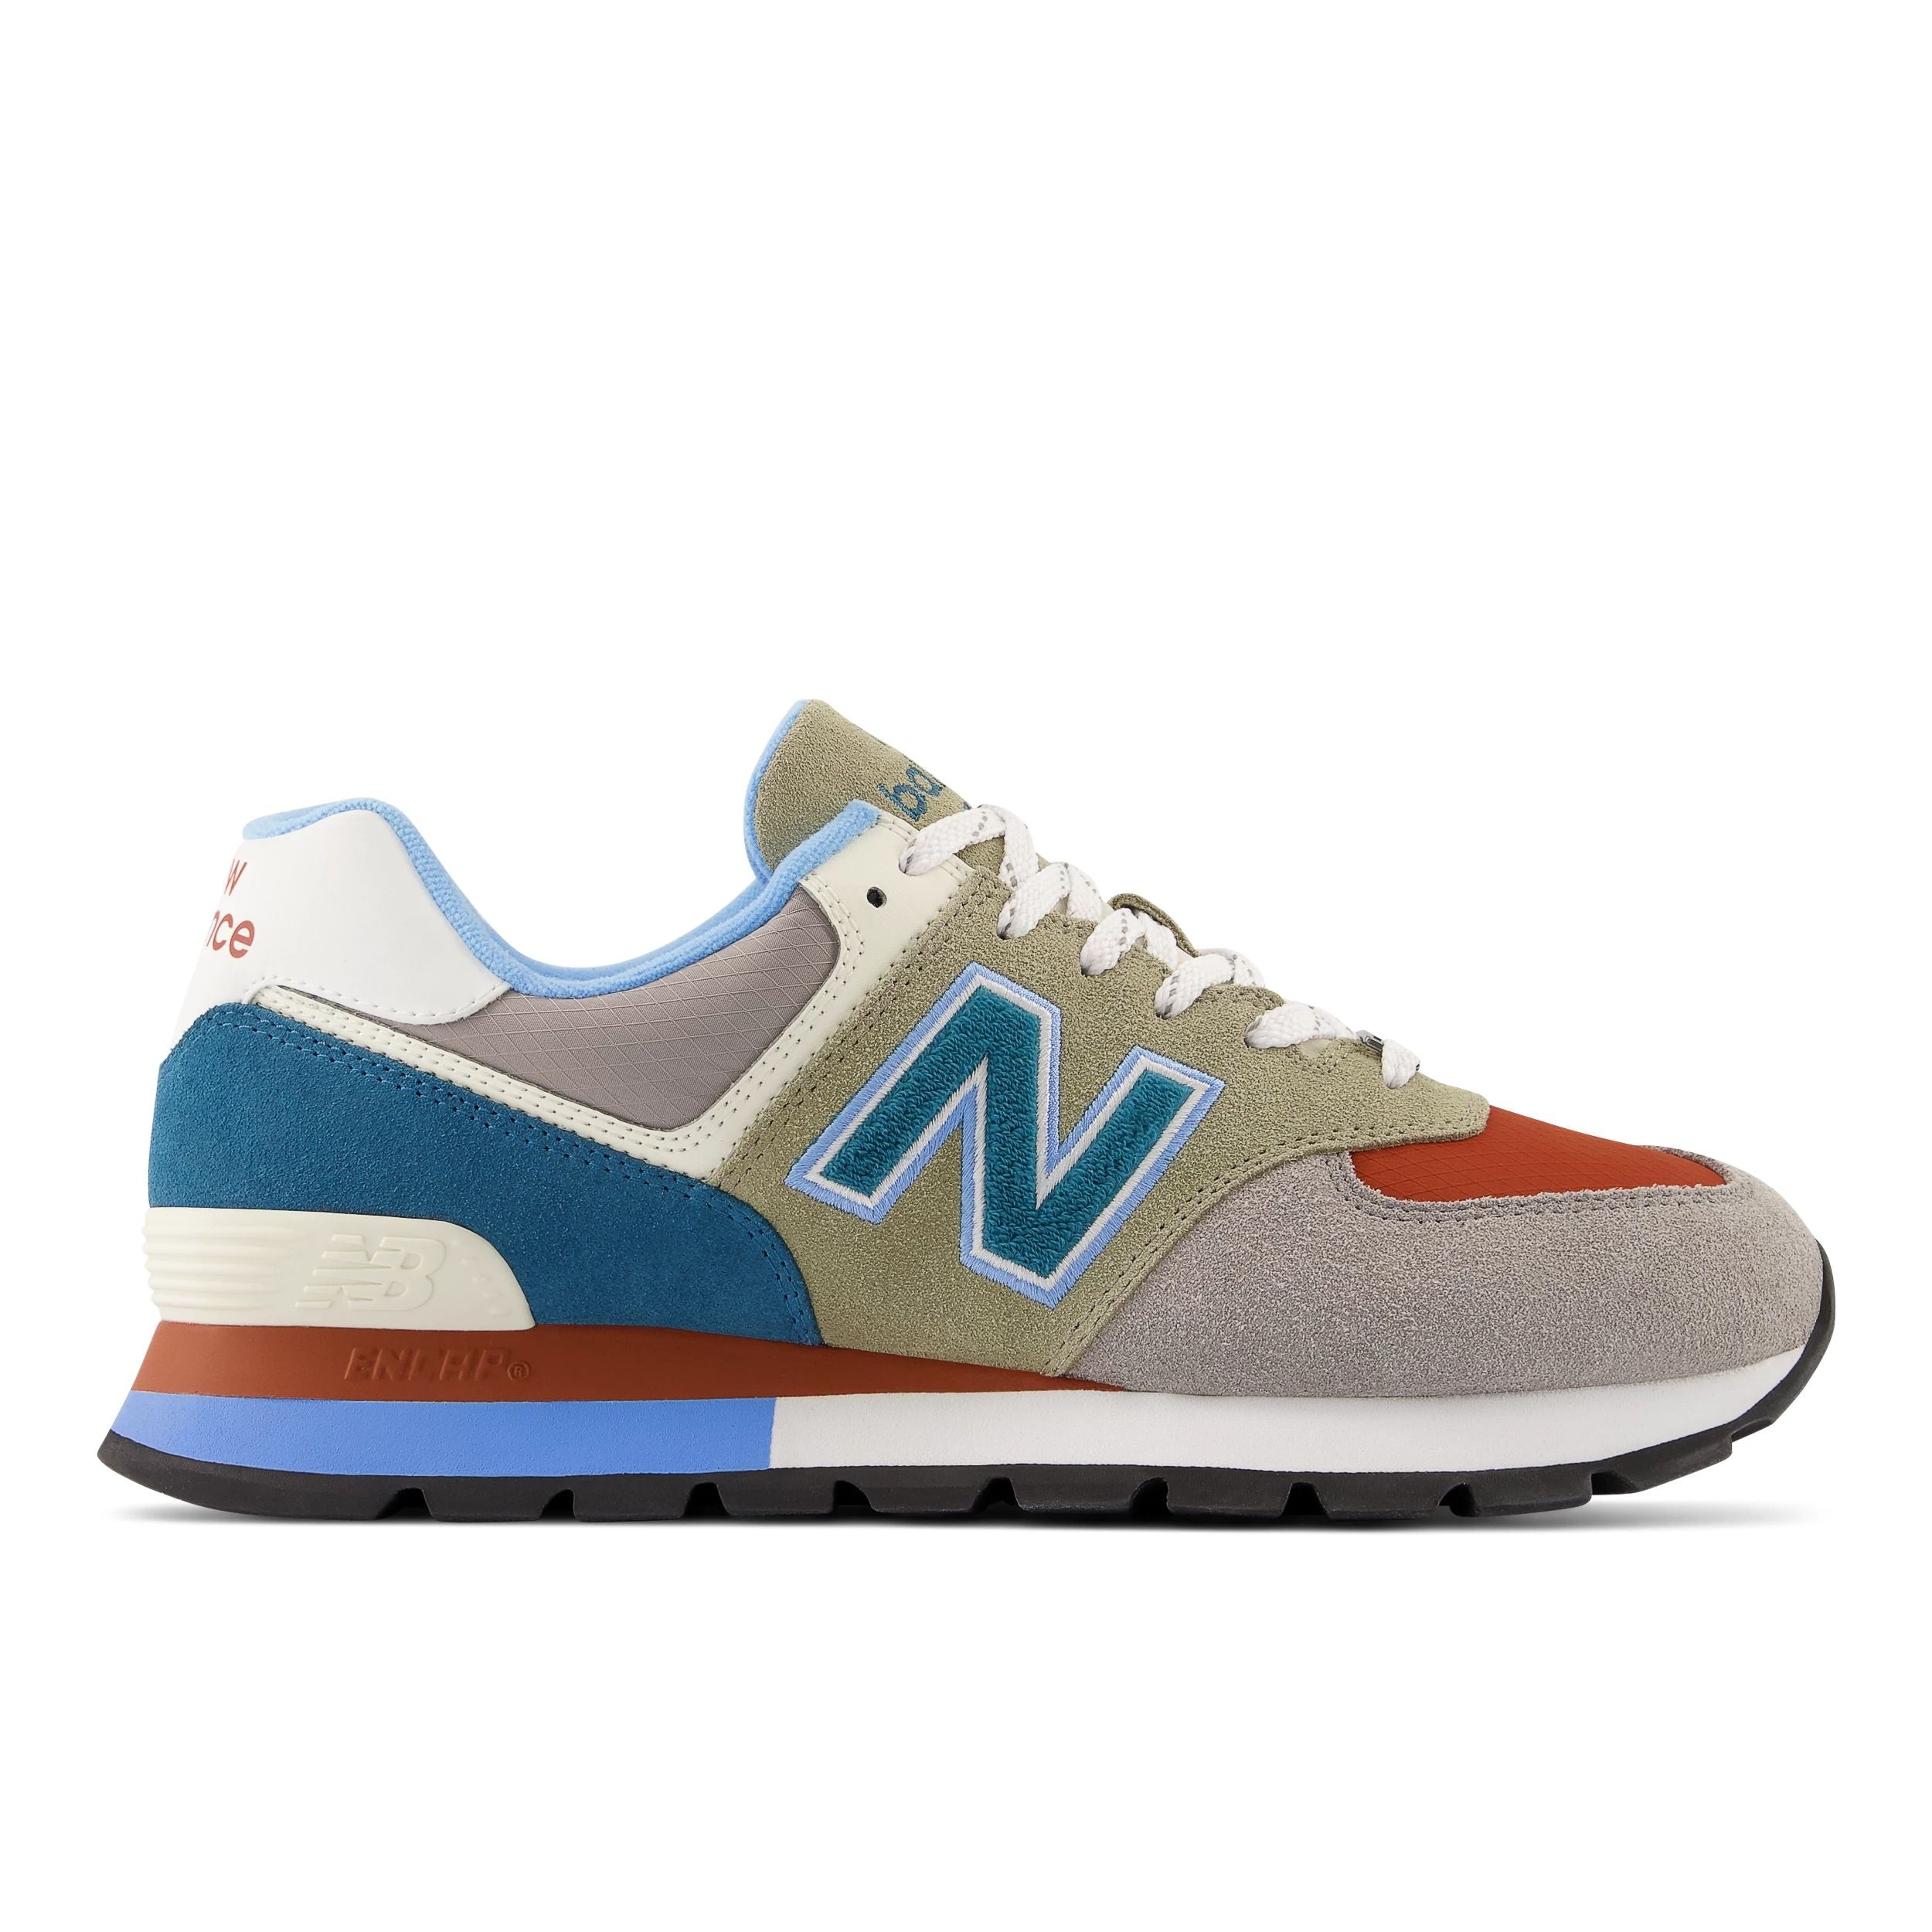 Lateral view of the Men's 574 by New Balance in the color Grey/Blue